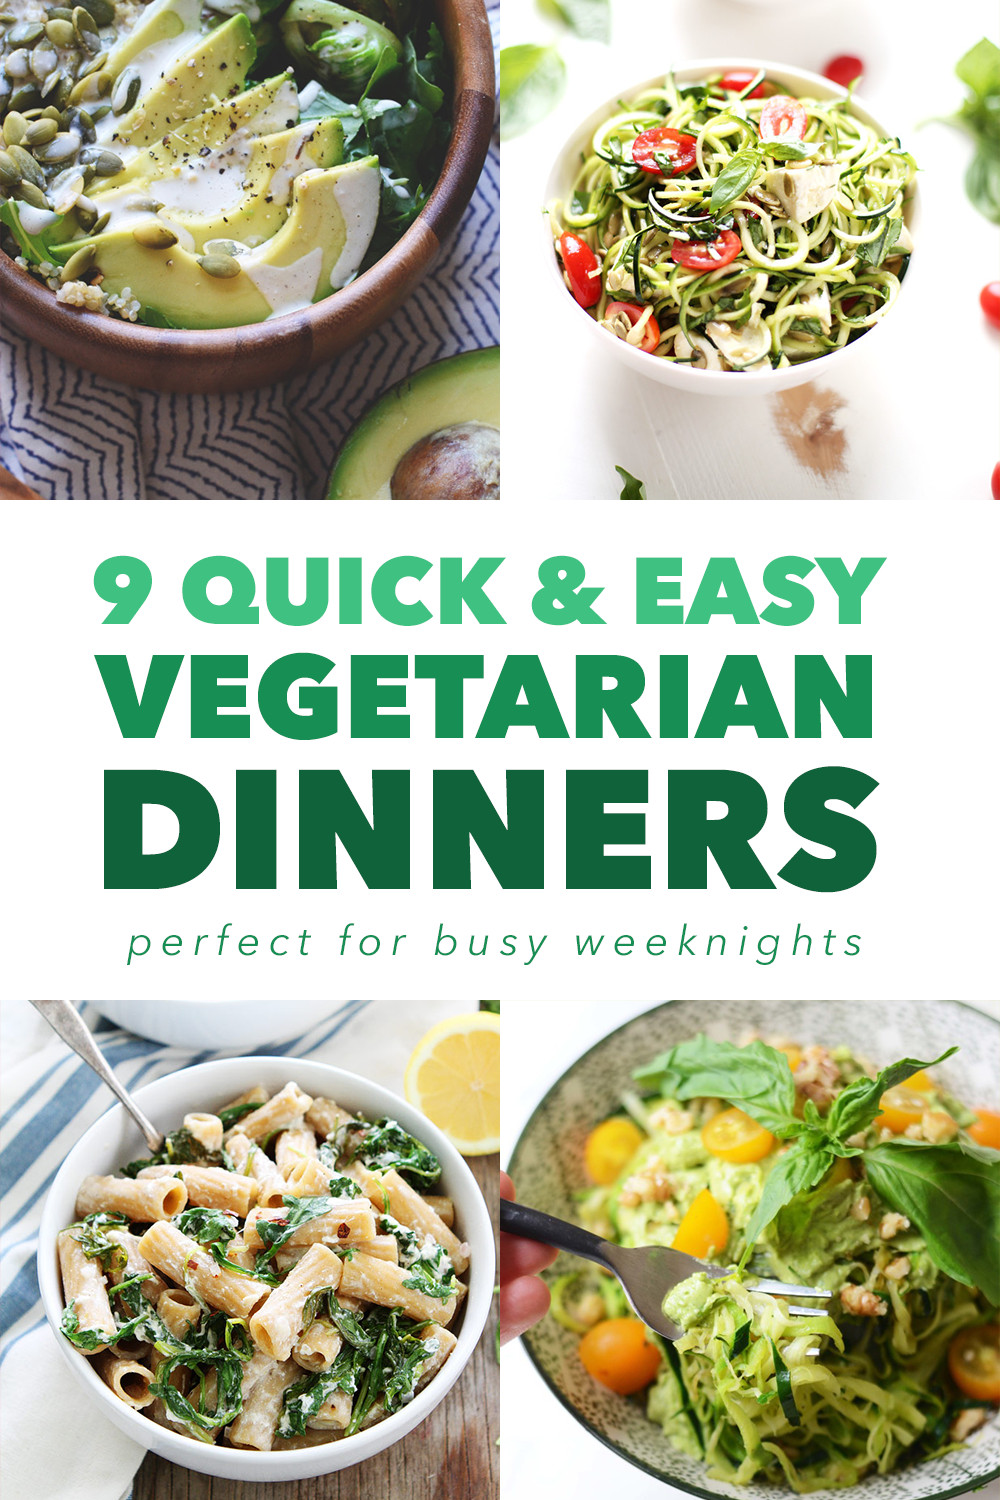 Easy Vegetarian Dinner Recipes
 9 Quick and Easy Ve arian Dinners for Busy Weeknights